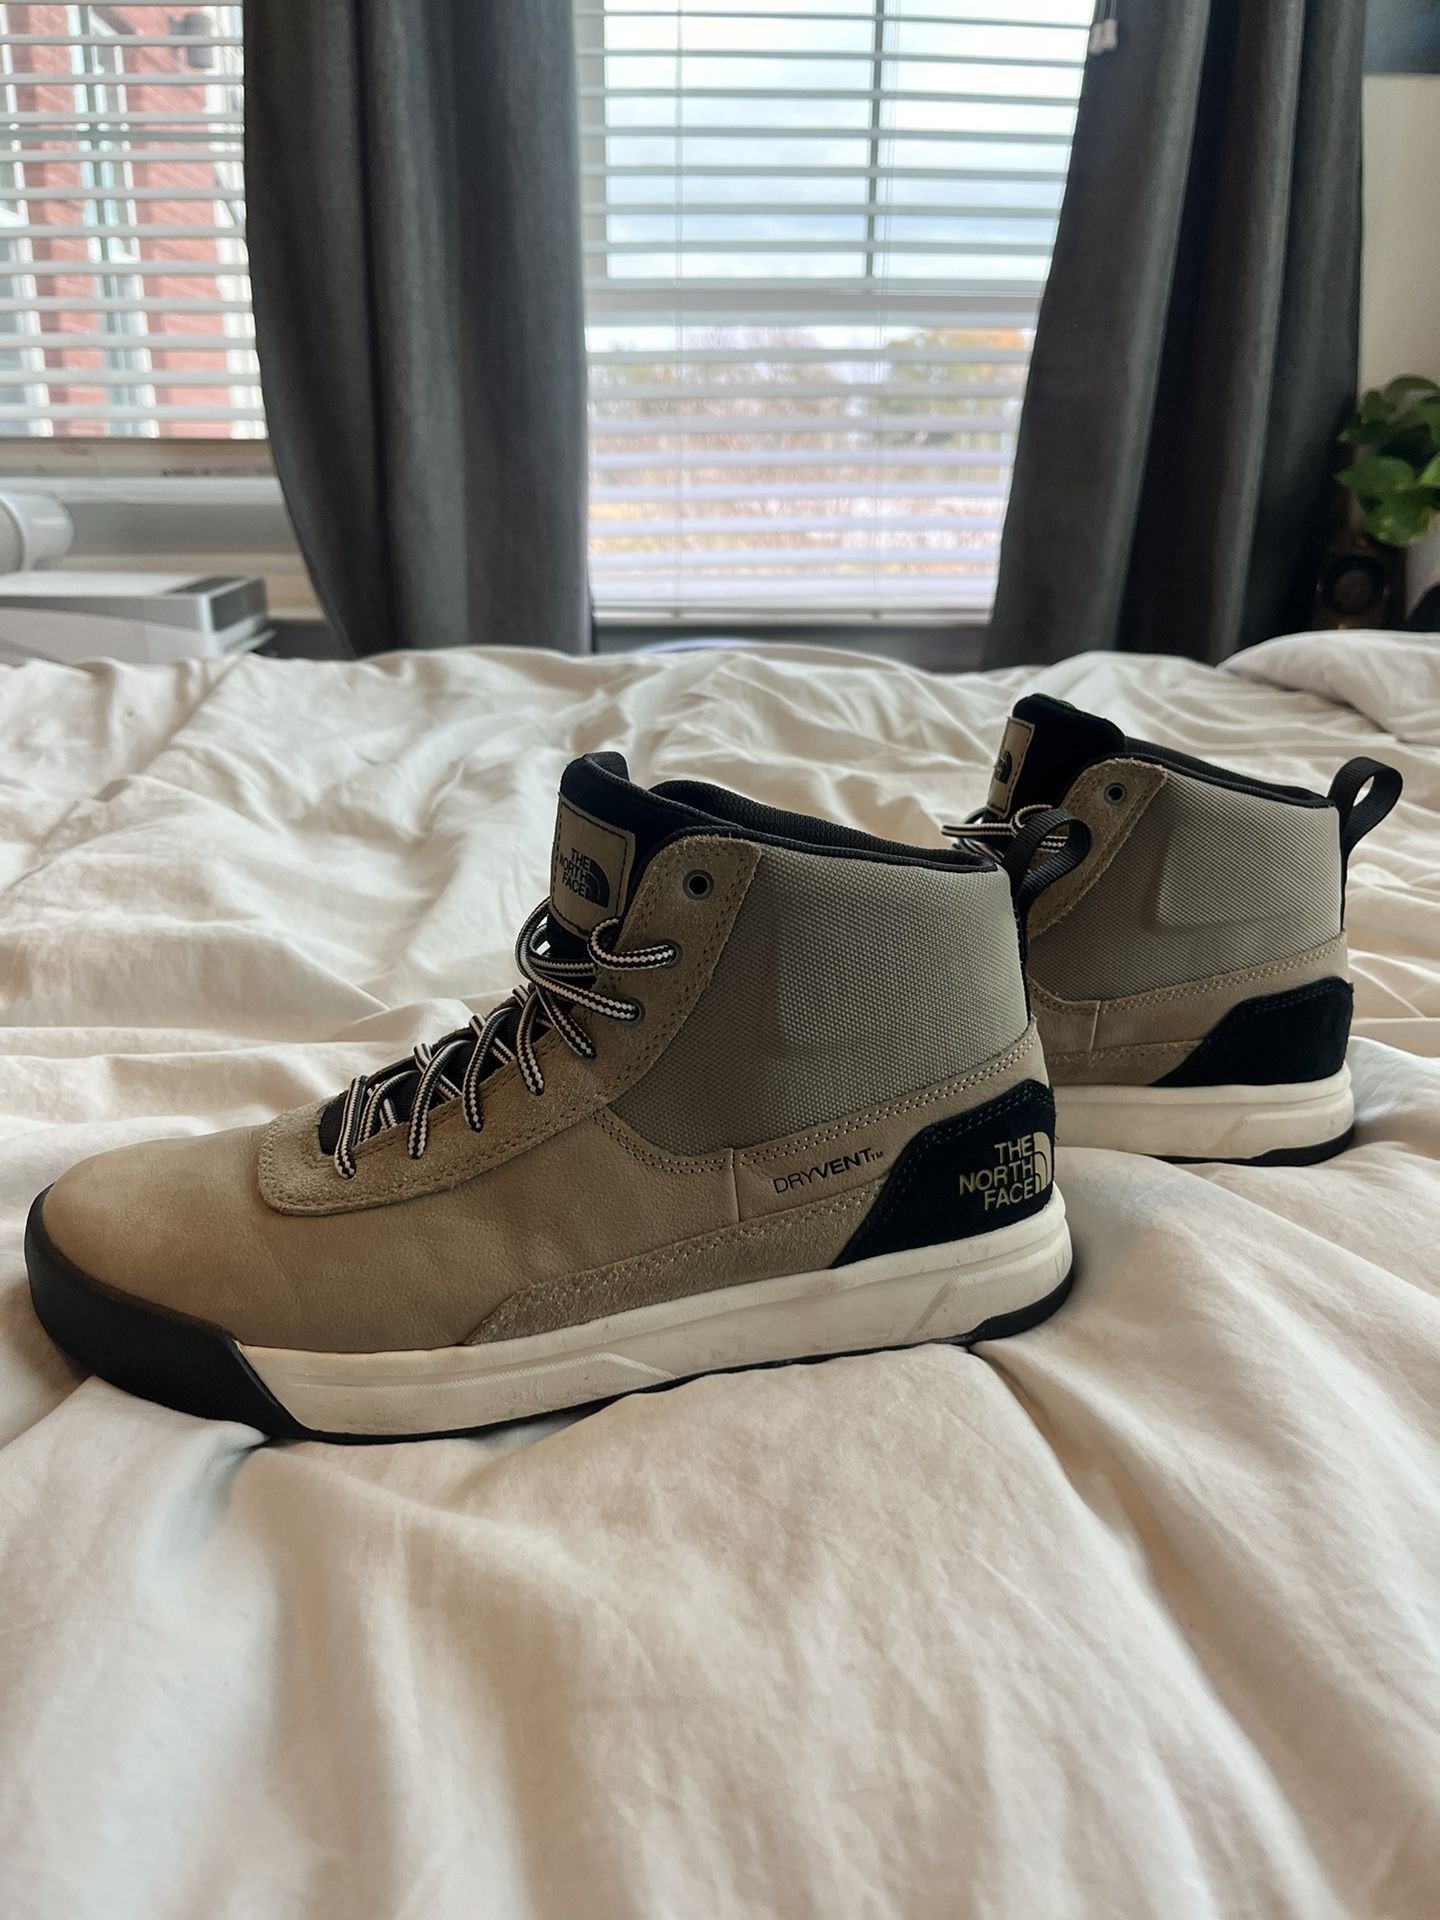 North Face Winter Boots, Size 9